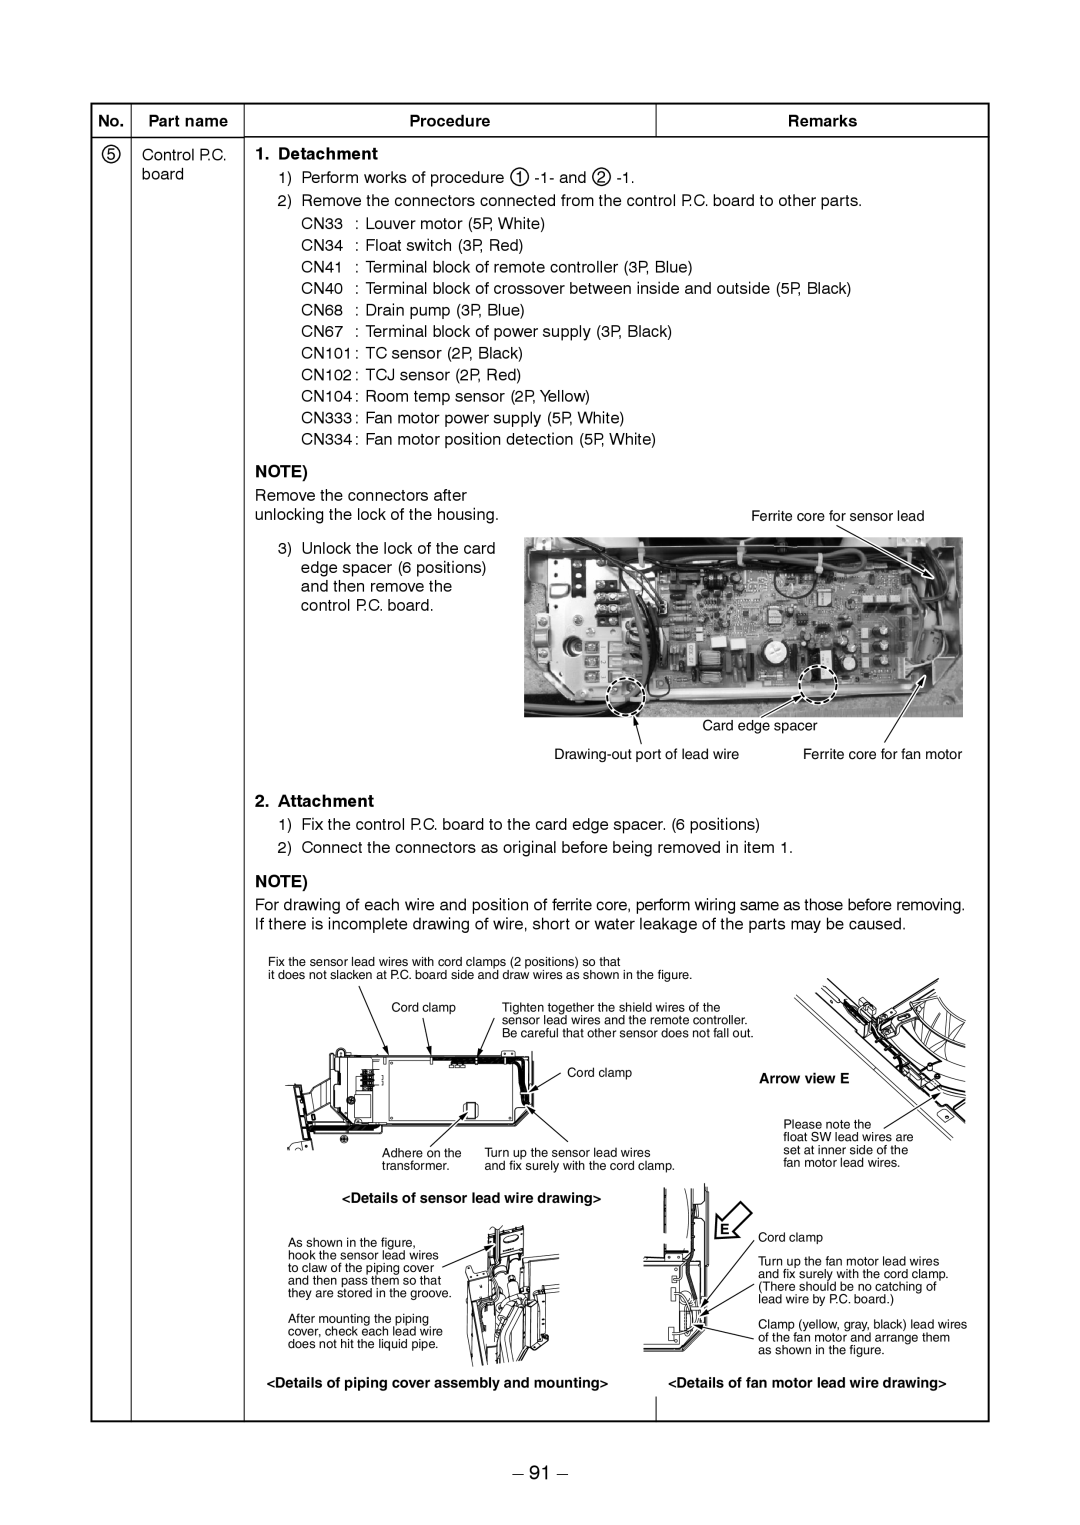 Toshiba CONCEALED DUCK TYPE, CEILING TYPE service manual Detachment, Attachment, No. Part name, Procedure, Remarks 